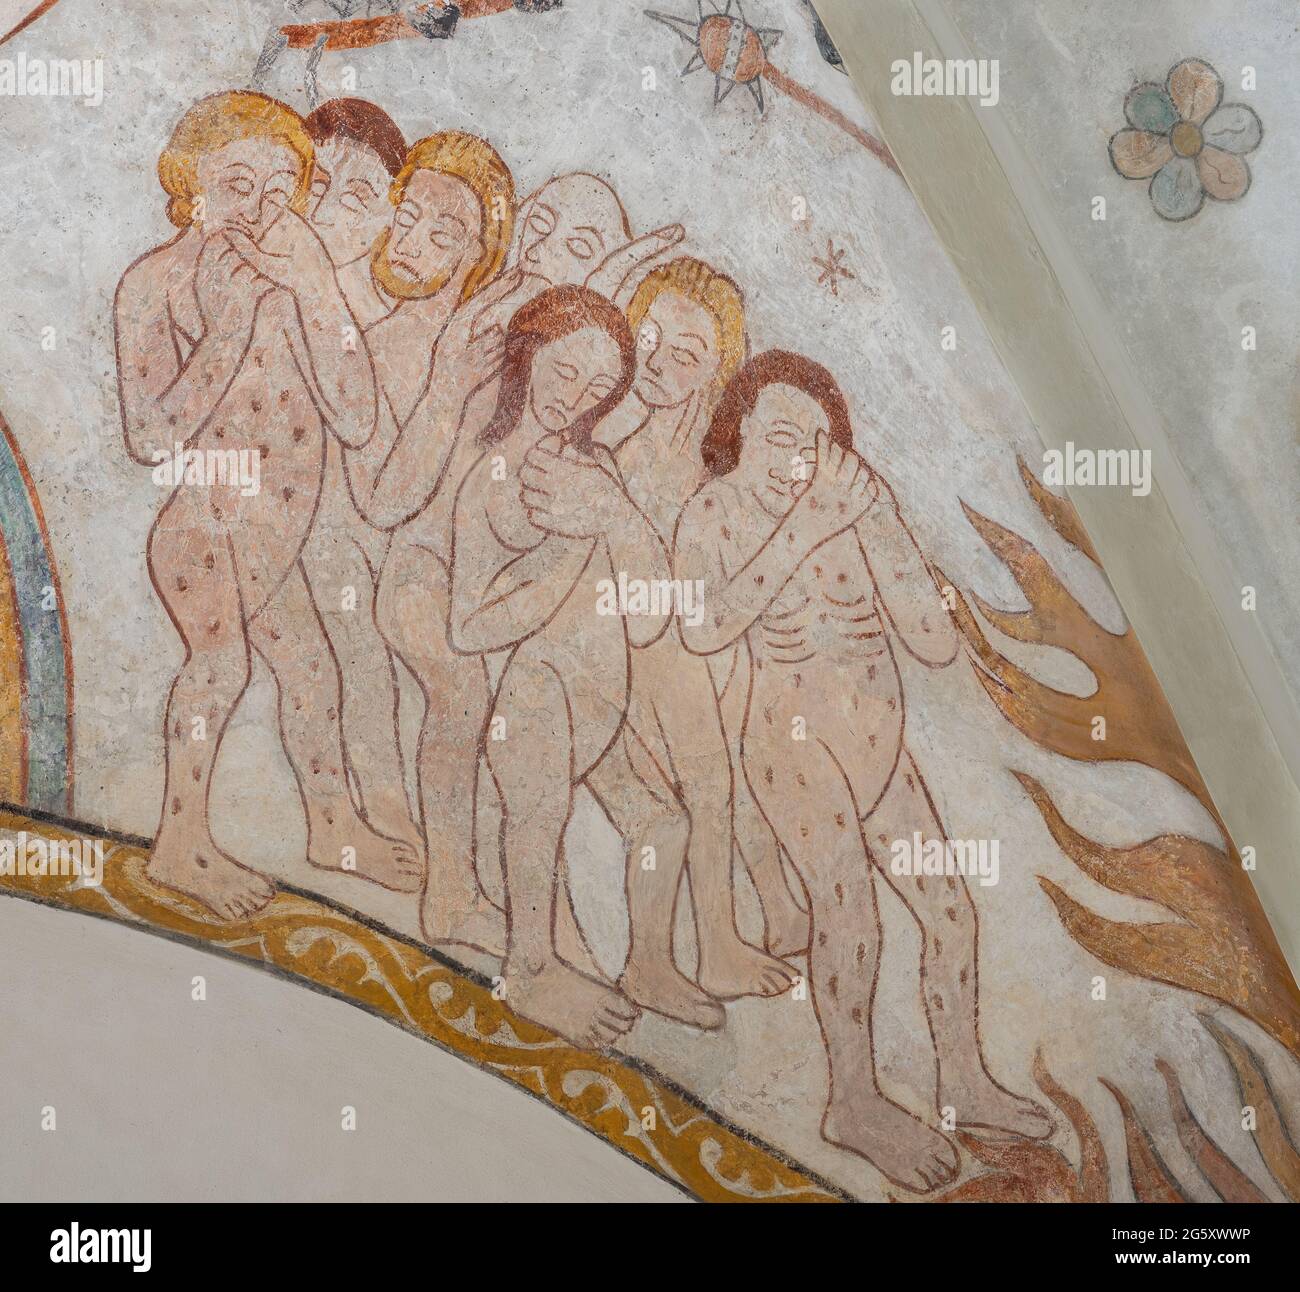 tormented Sinners walking down to the purgatory on an ancient mural in a danish church, Skibby, Denmark, June 28, 2021 Stock Photo